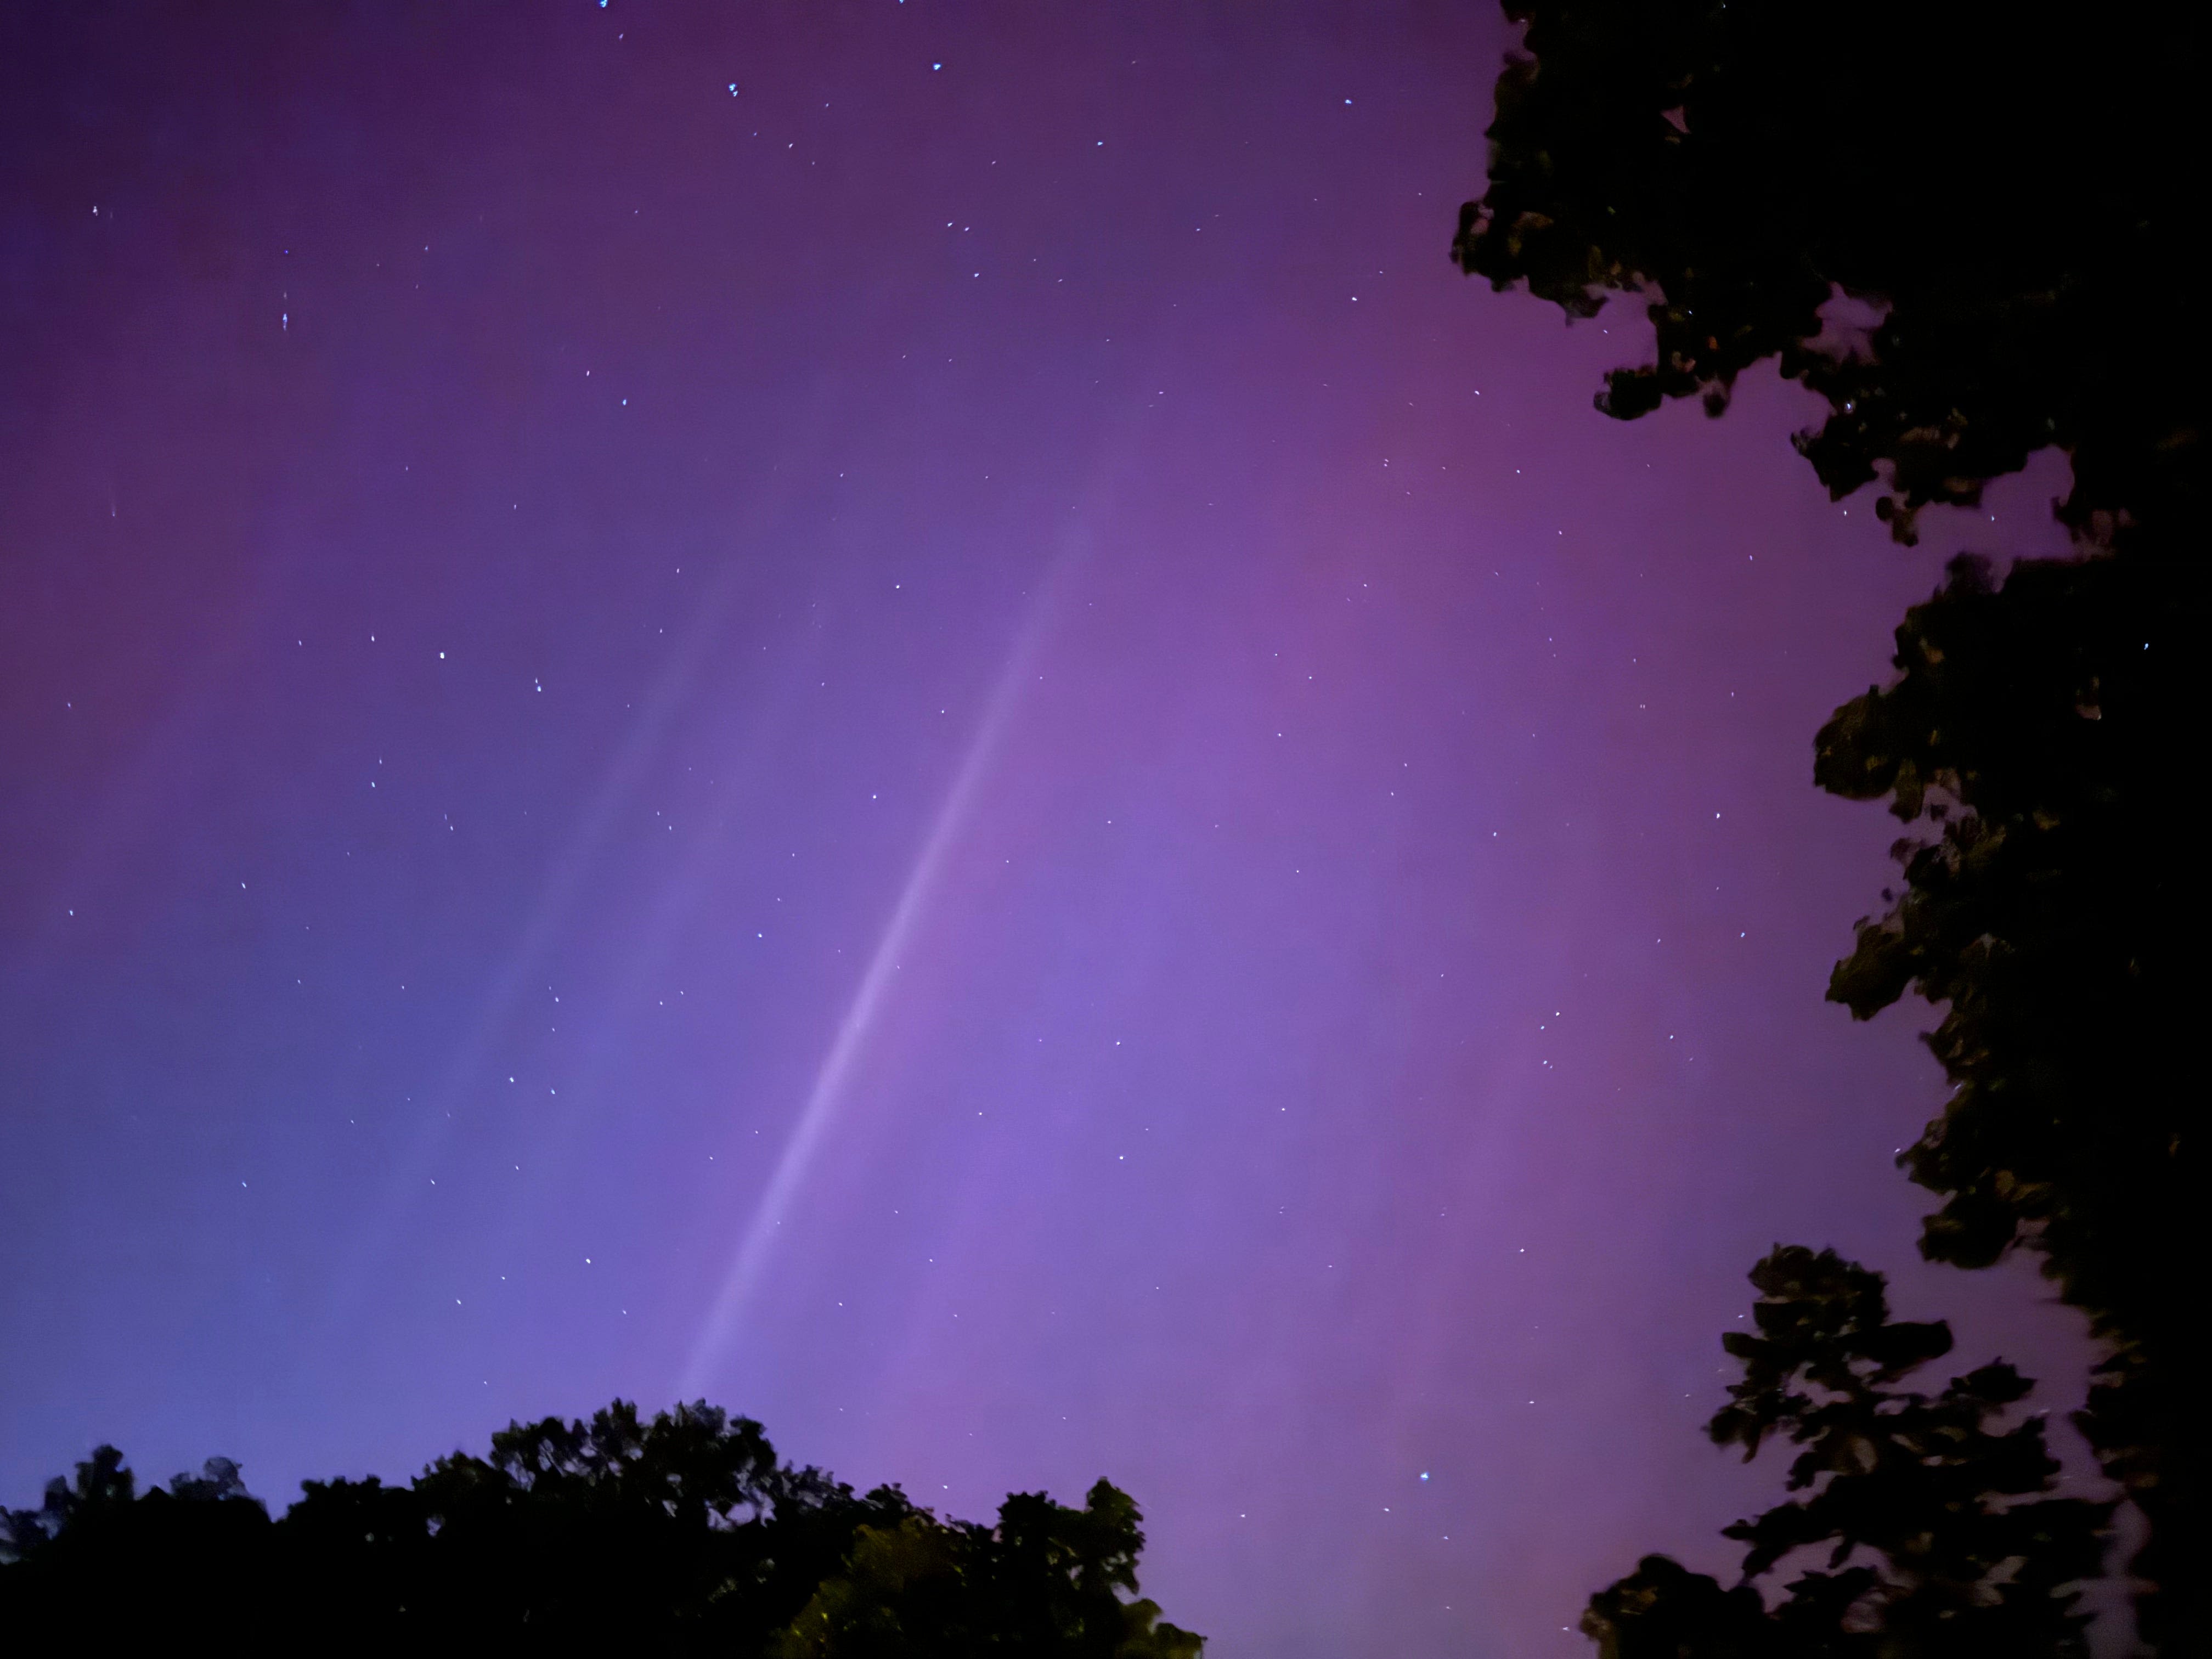 Northern lights in Tallahassee: After devastating storms, aurora borealis stirs collective awe